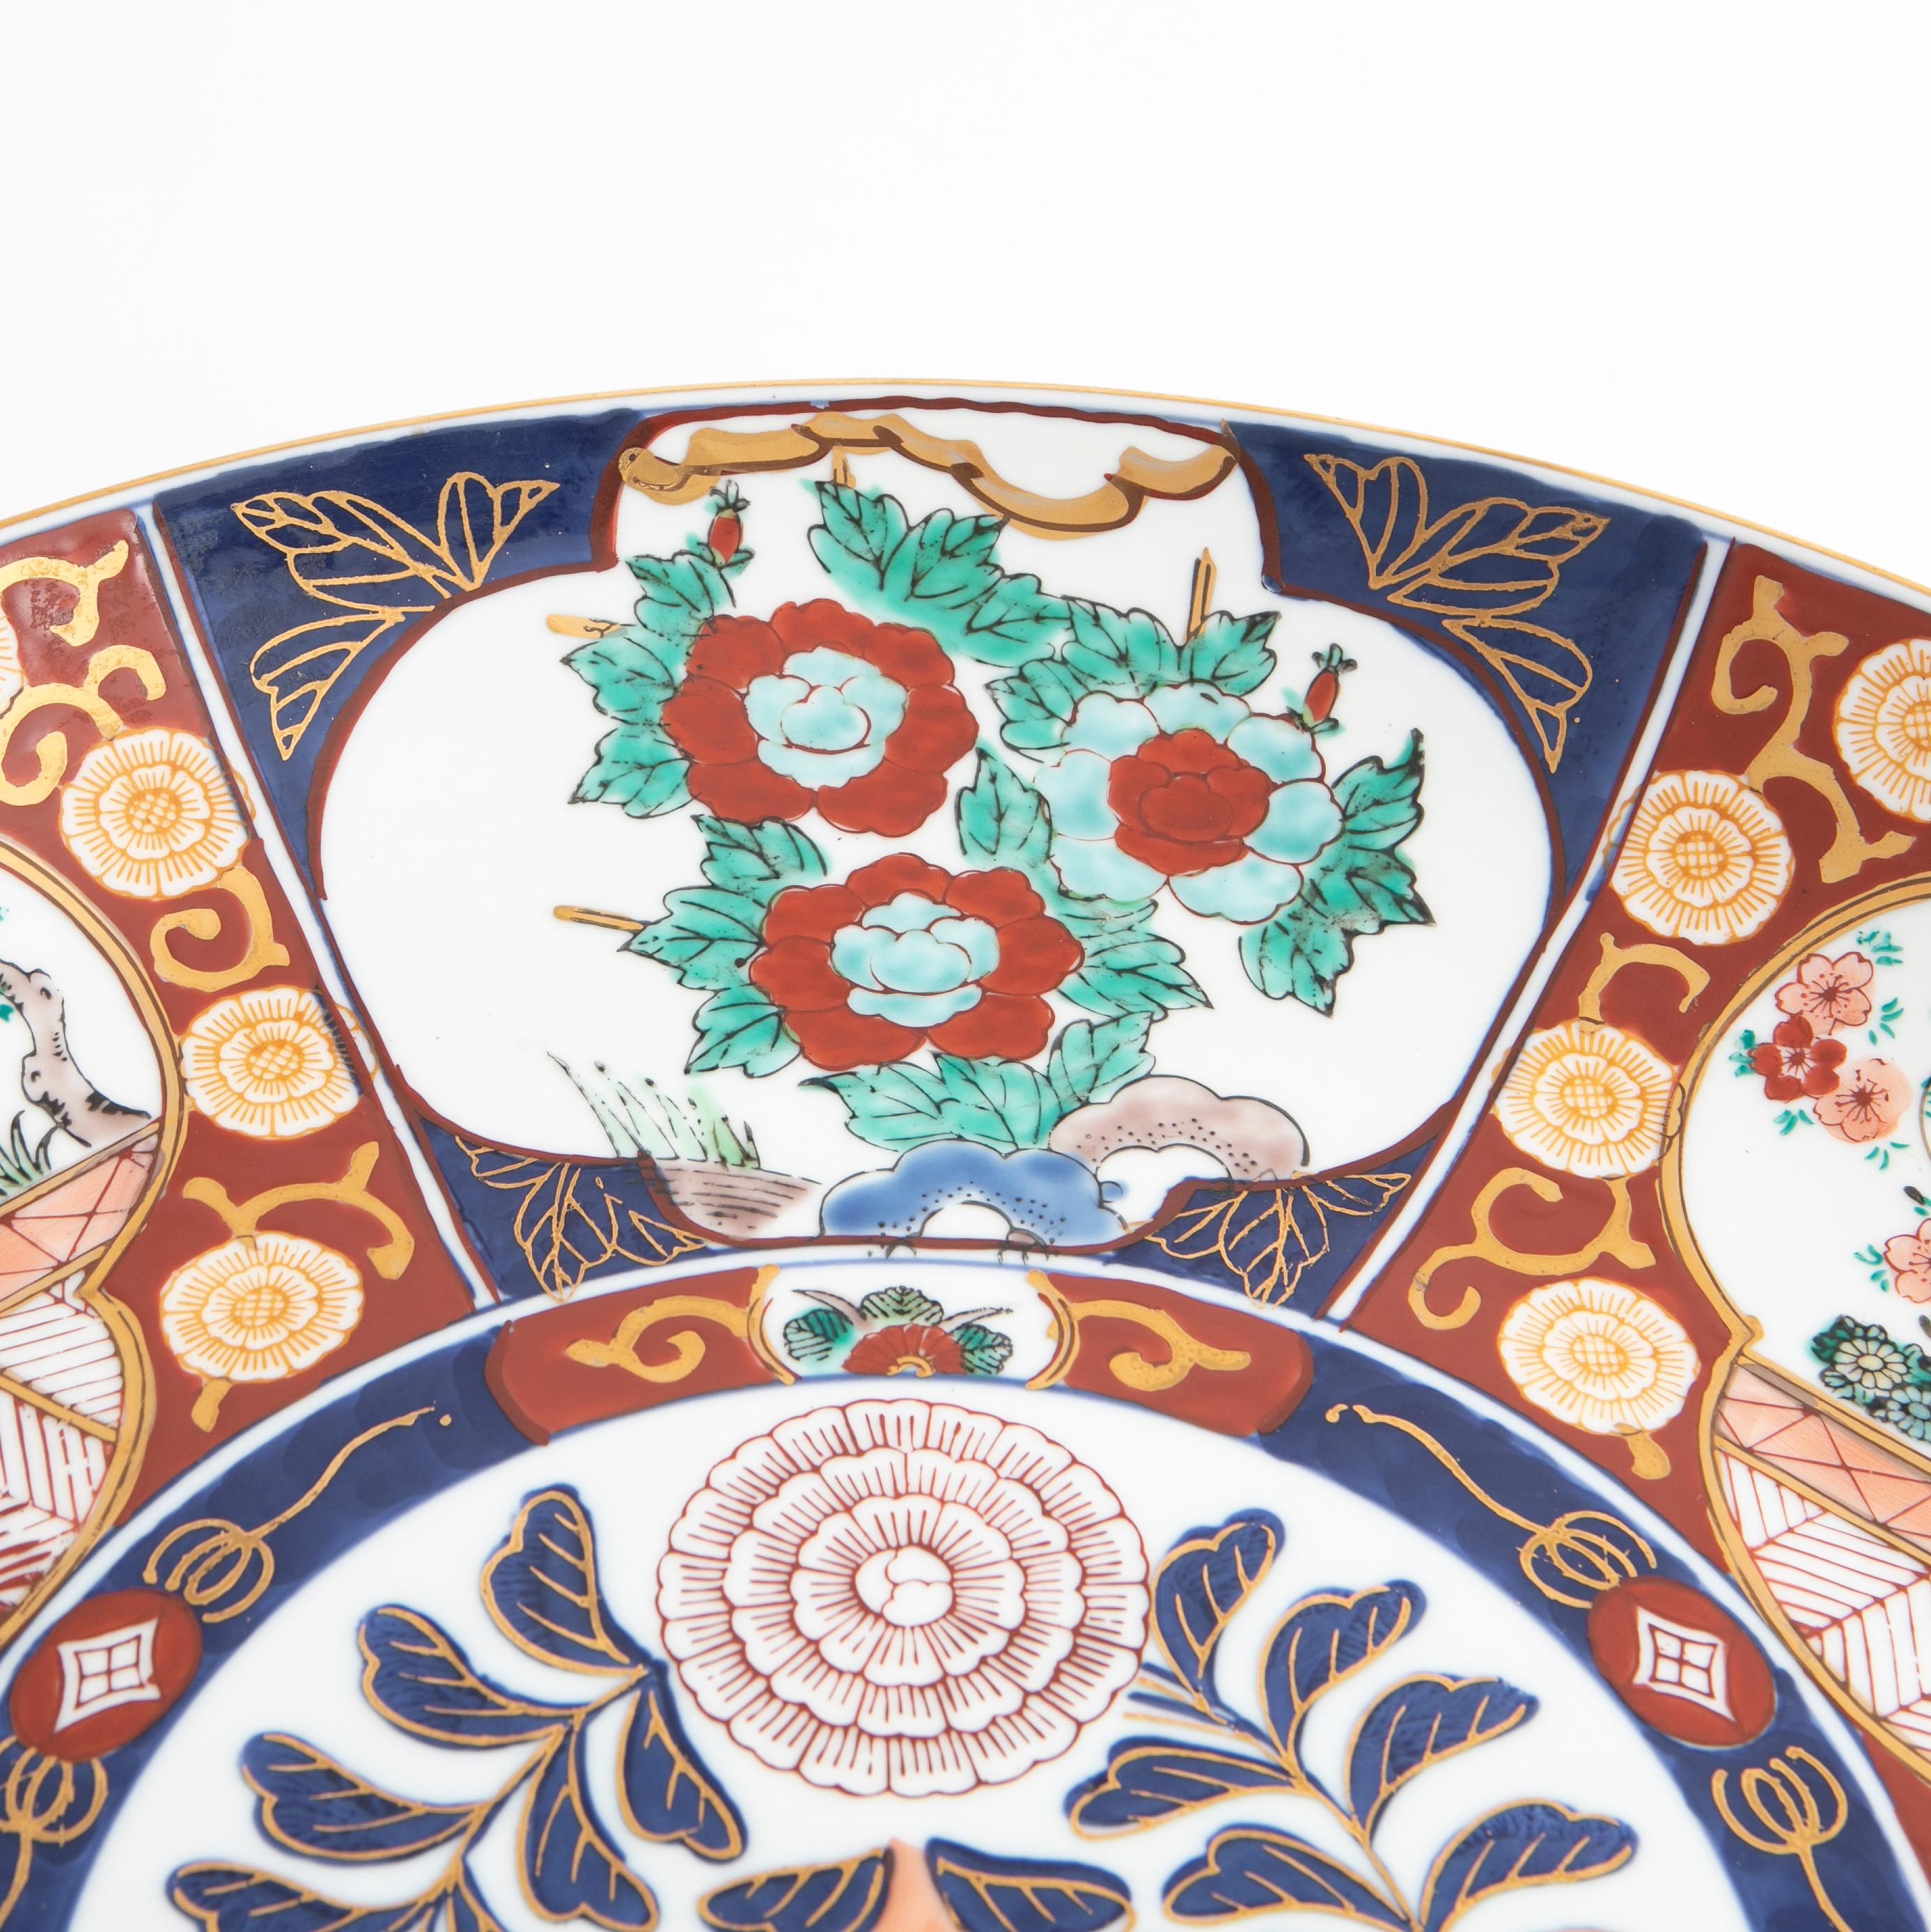 19th Century Large Japanese Imari Porcelain Charger from the Meiji Period For Sale